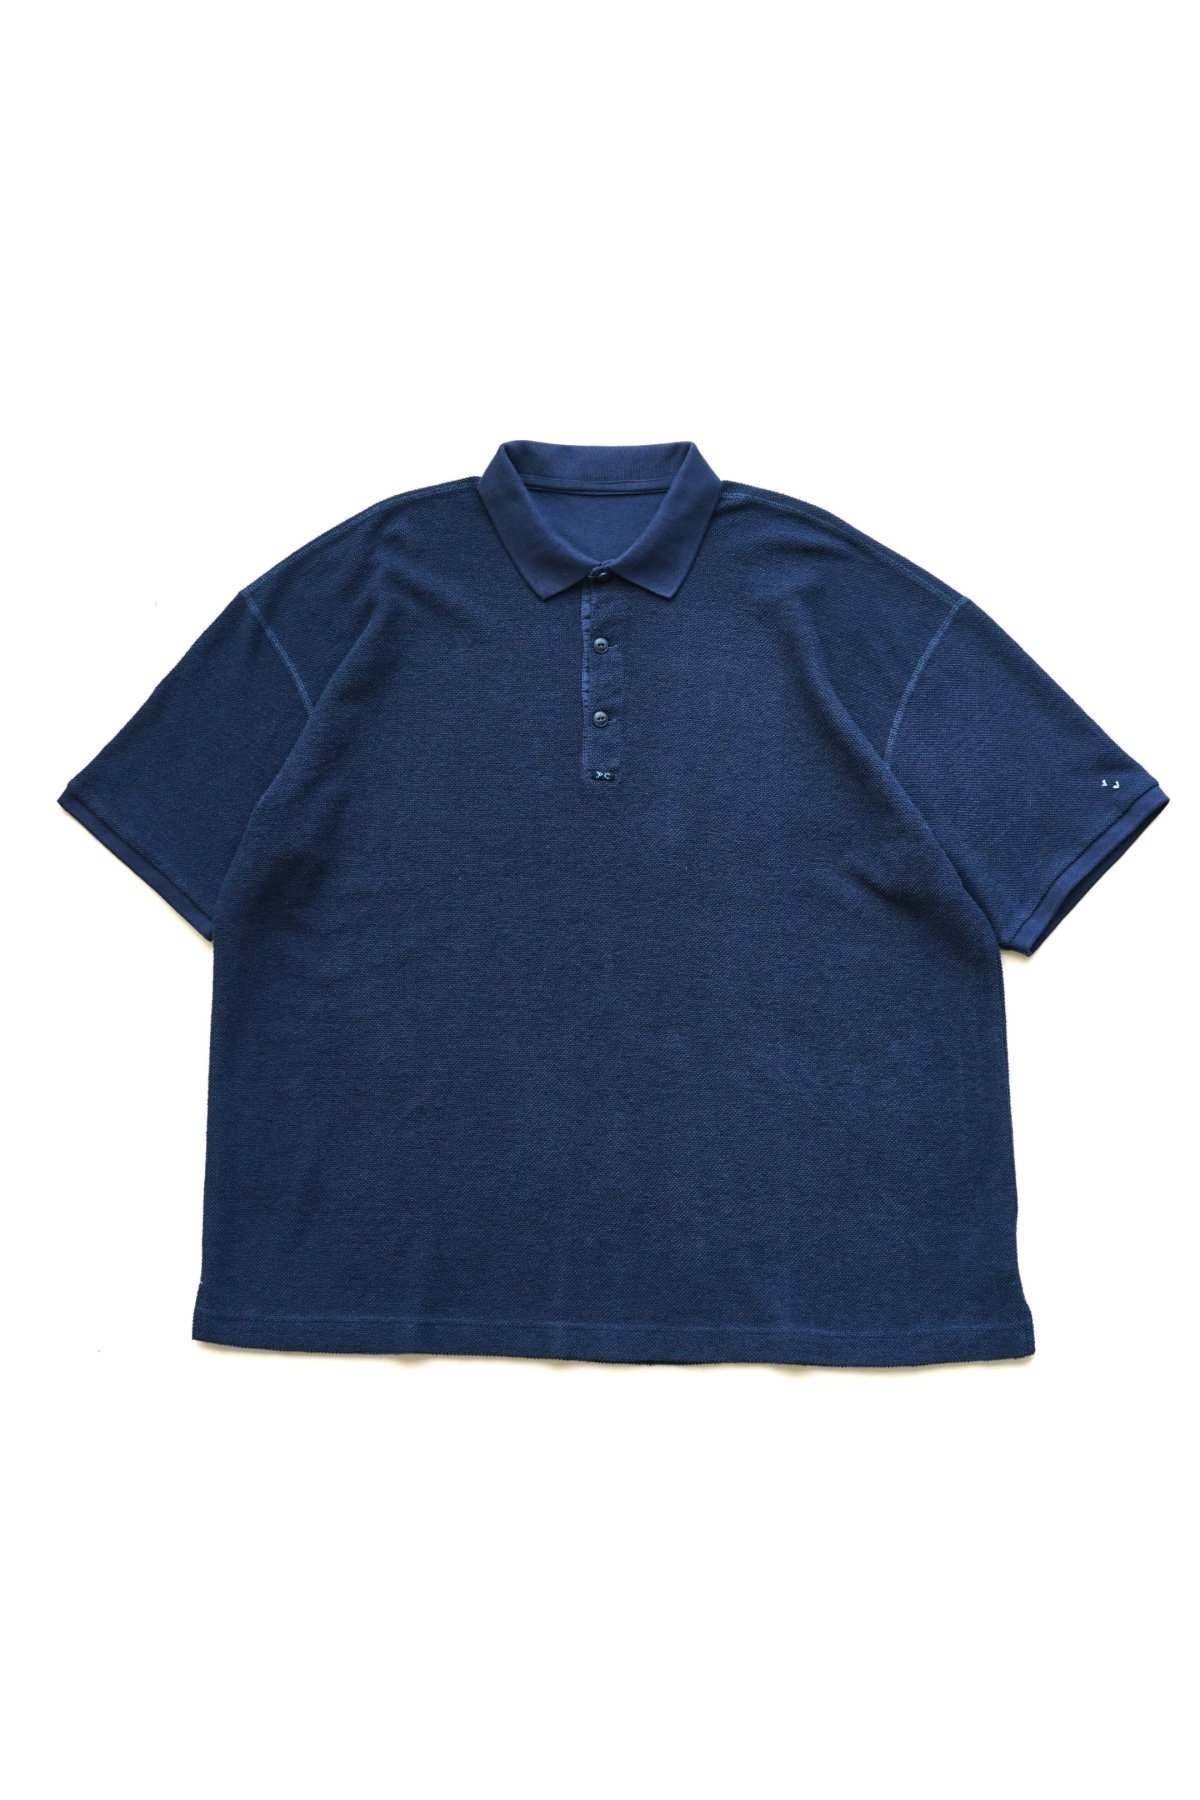 Porter Classic - SUMMER PILE POLO SHIRT - NAVY ポータークラシック ...